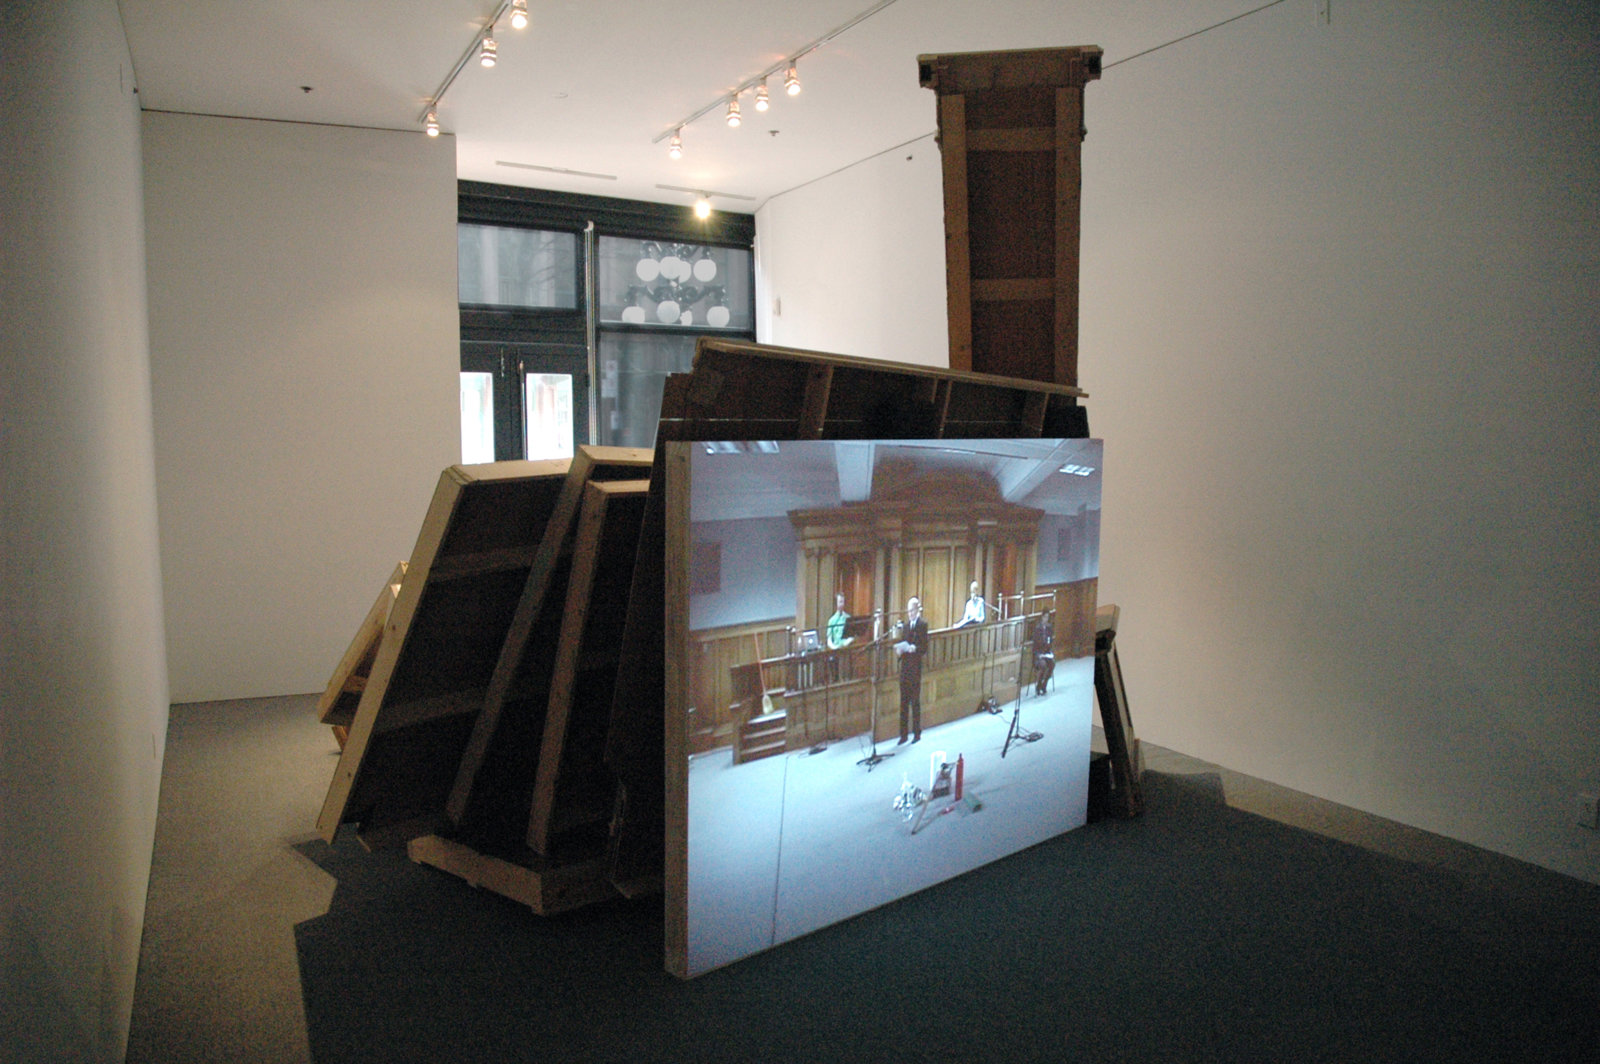 Geoffrey Farmer and Judy Radul, Room 302, 2005, courtroom furnishings and DVD projection, dimensions variable